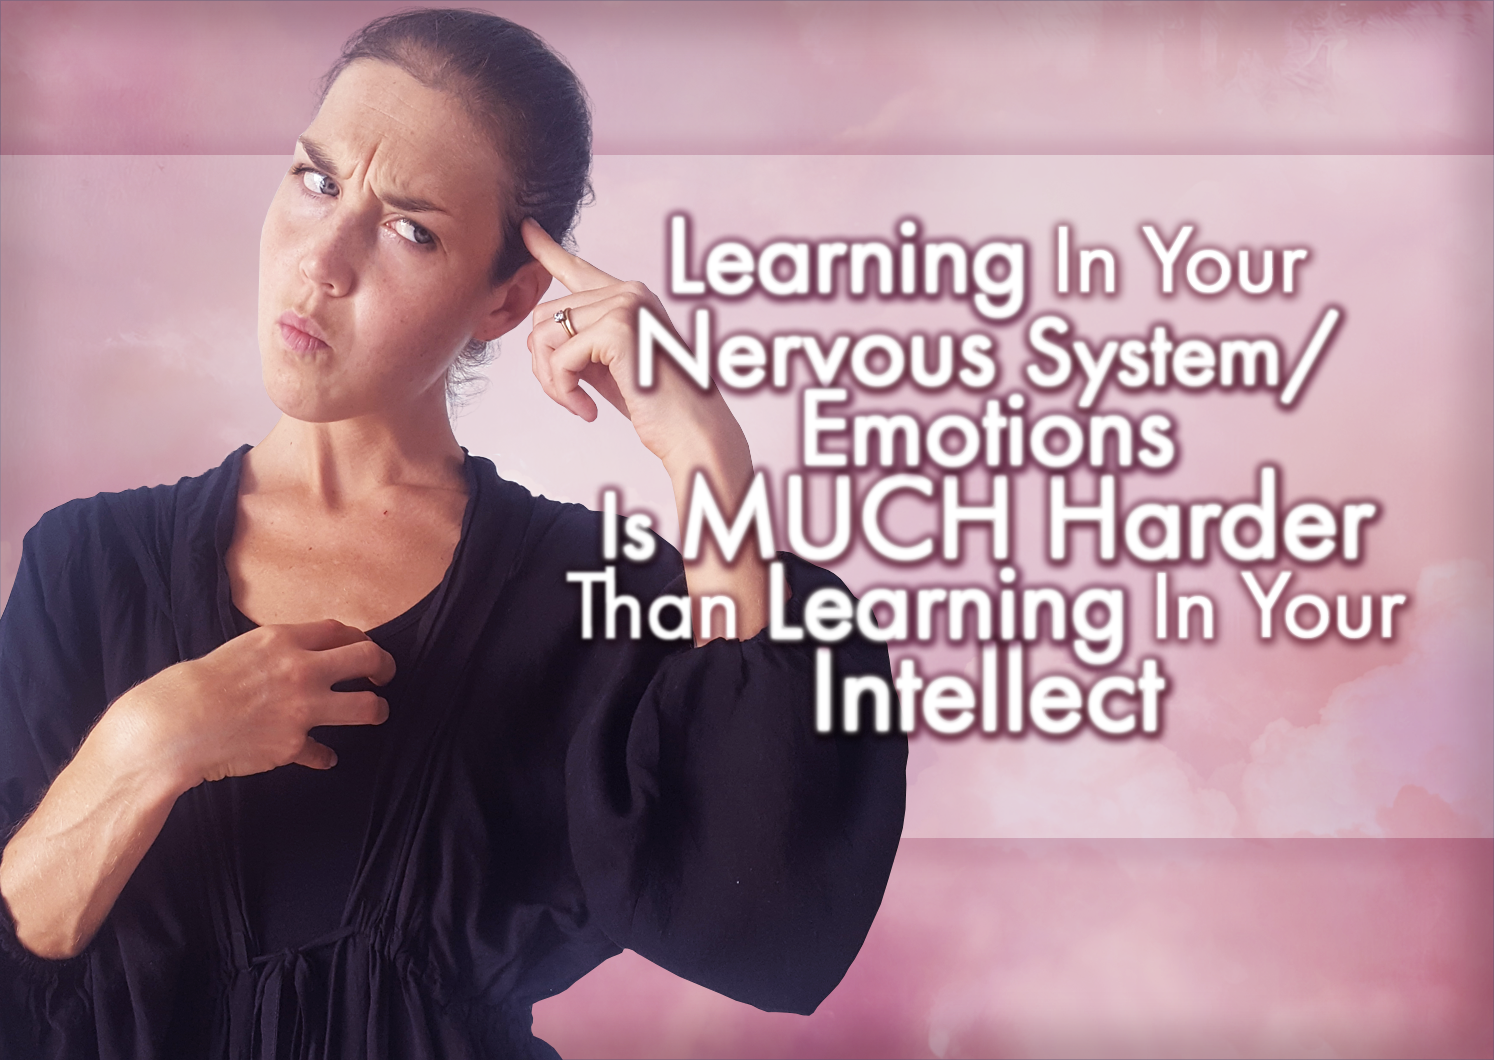 Learning In Your Nervous System/Emotions Is MUCH Harder Than Learning In Your Intellect